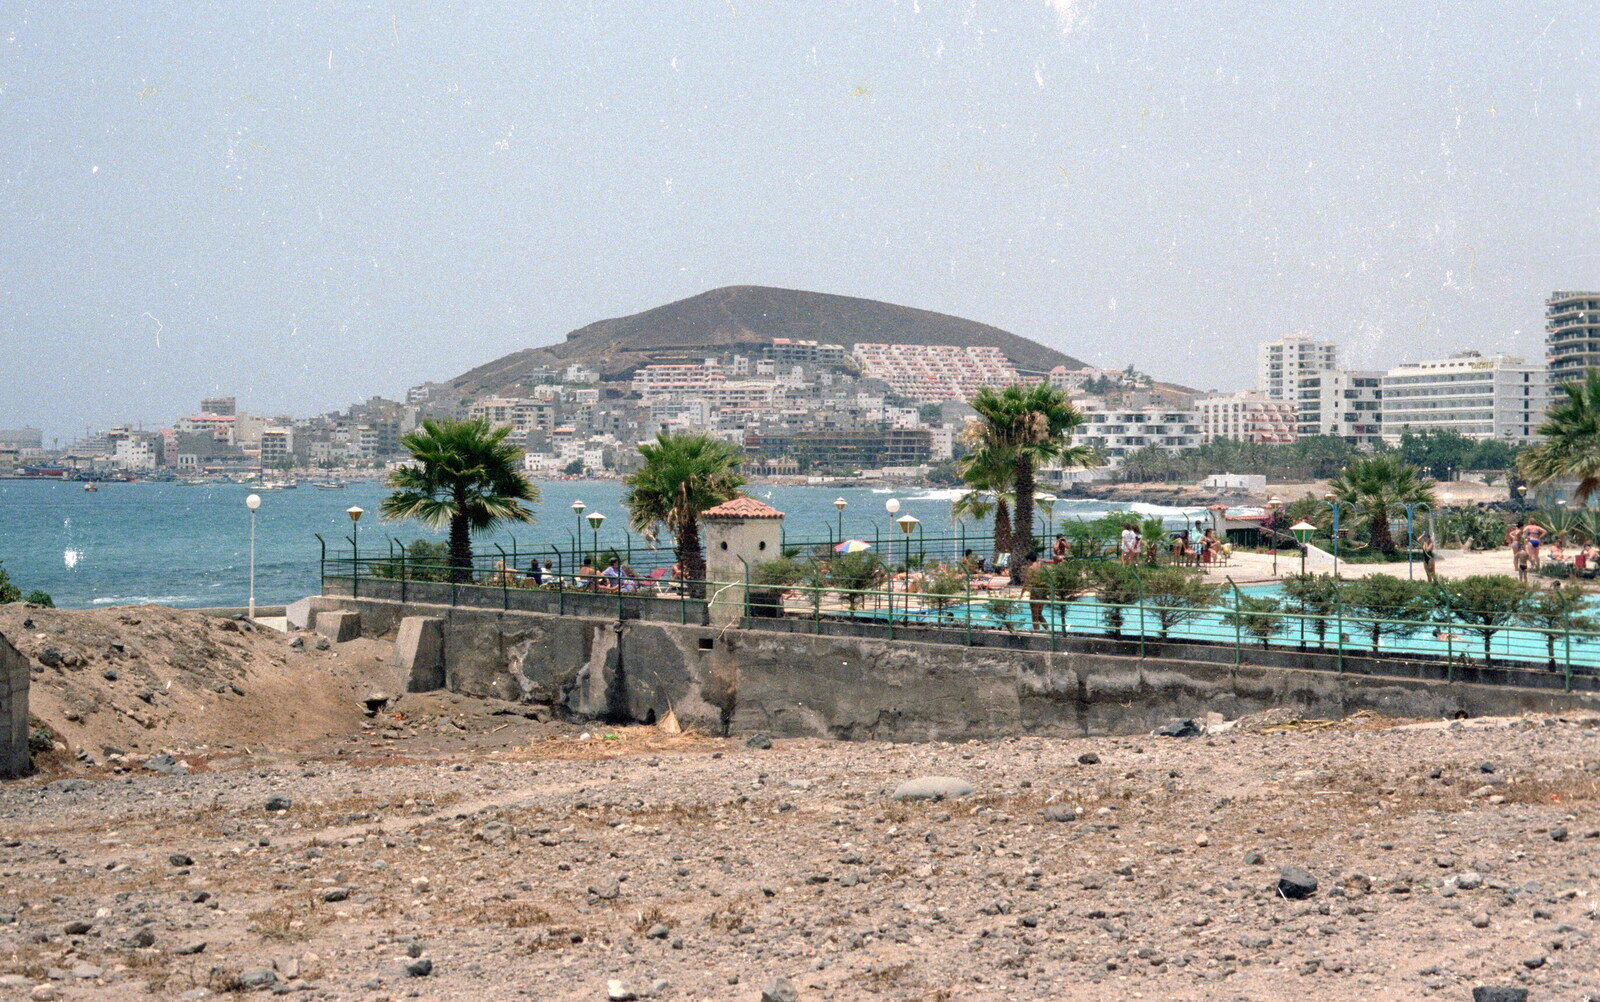 Rubble and hotels from A Holiday in Los Christianos, Tenerife - 19th June 1985